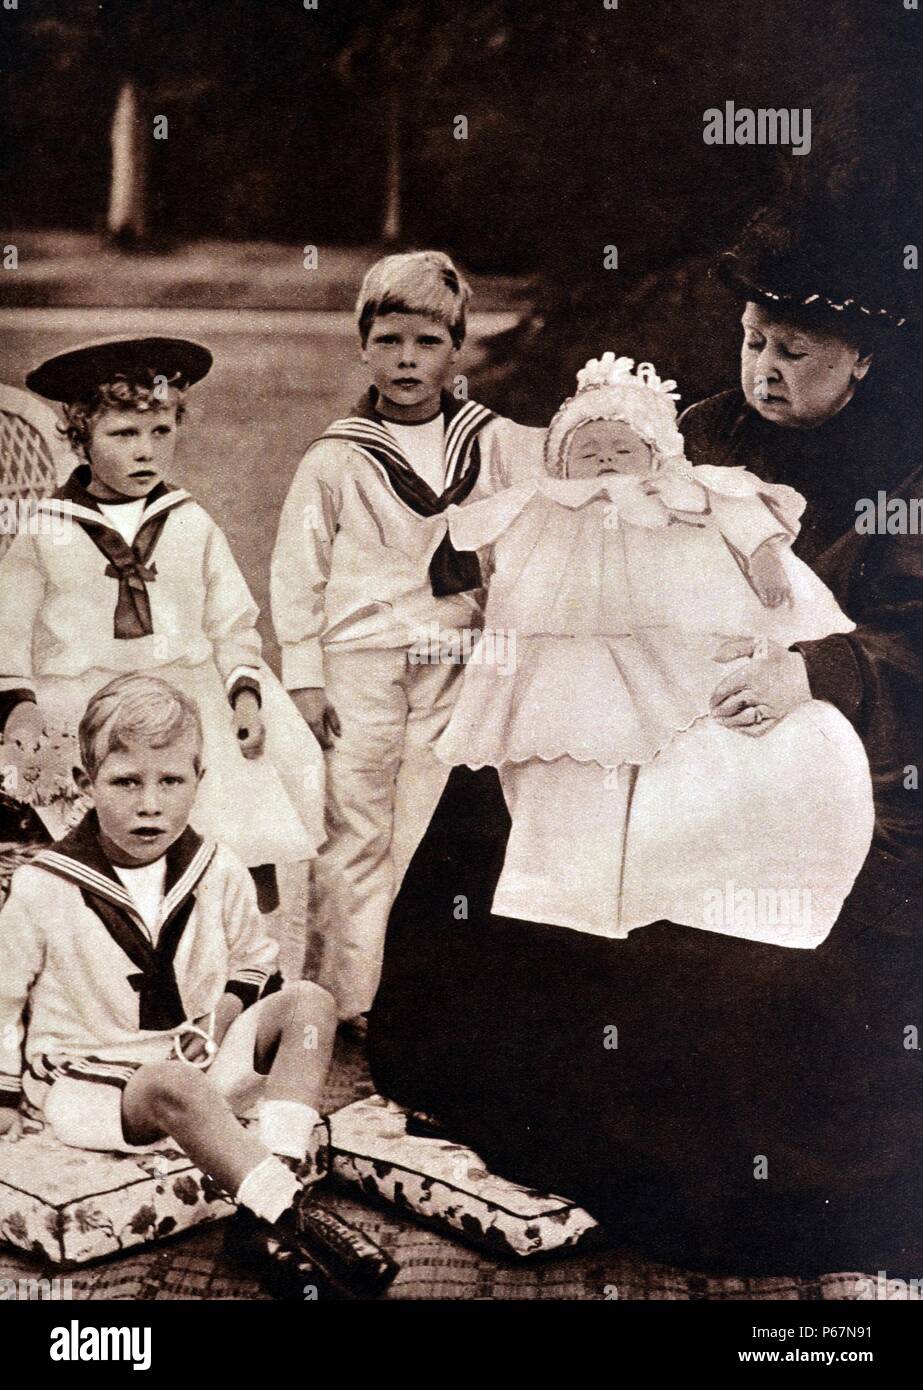 Royal Family portrait shows Queen Victoria with her 4 grandchildren. Princess Mary is shown wearing a hat, to her right is Prince Edward, Prince Albert is seated at the front and the newborn, Prince Henry is in Victoria's arms. Stock Photo